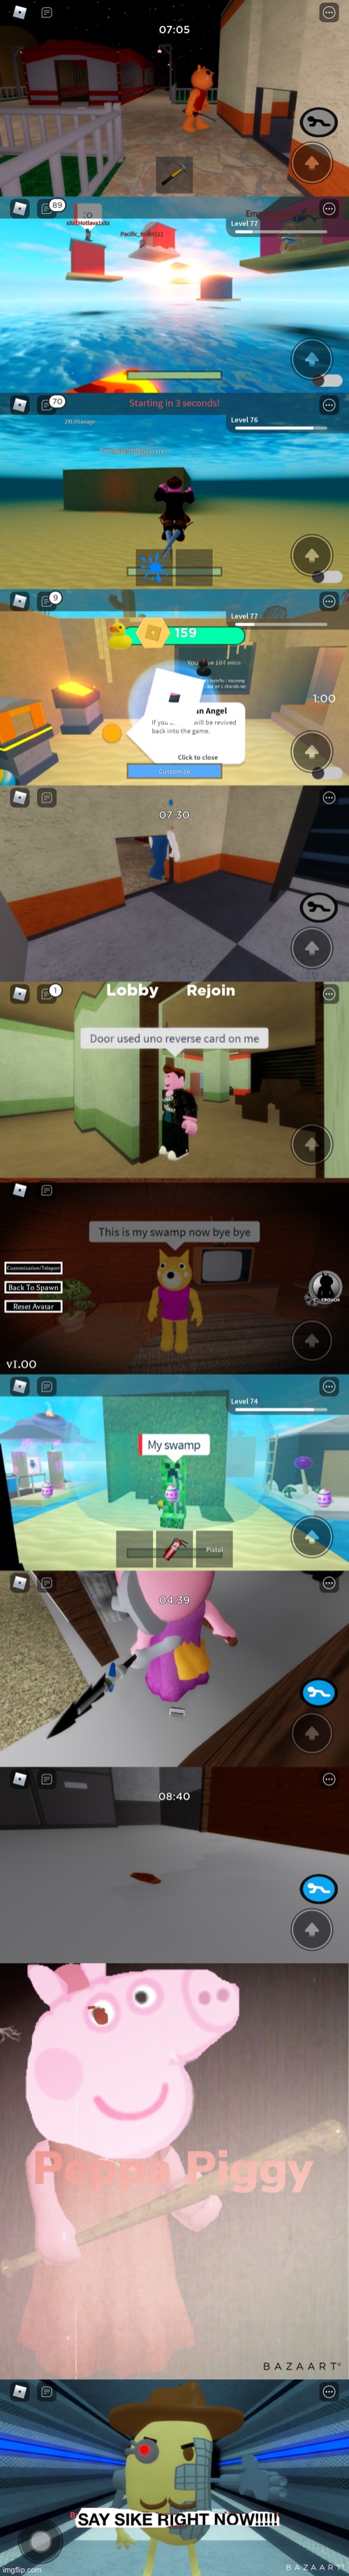 Extremely Cursed Roblox Pictures I Took While Playing Roblox Imgflip - cursed roblox meme imgflip